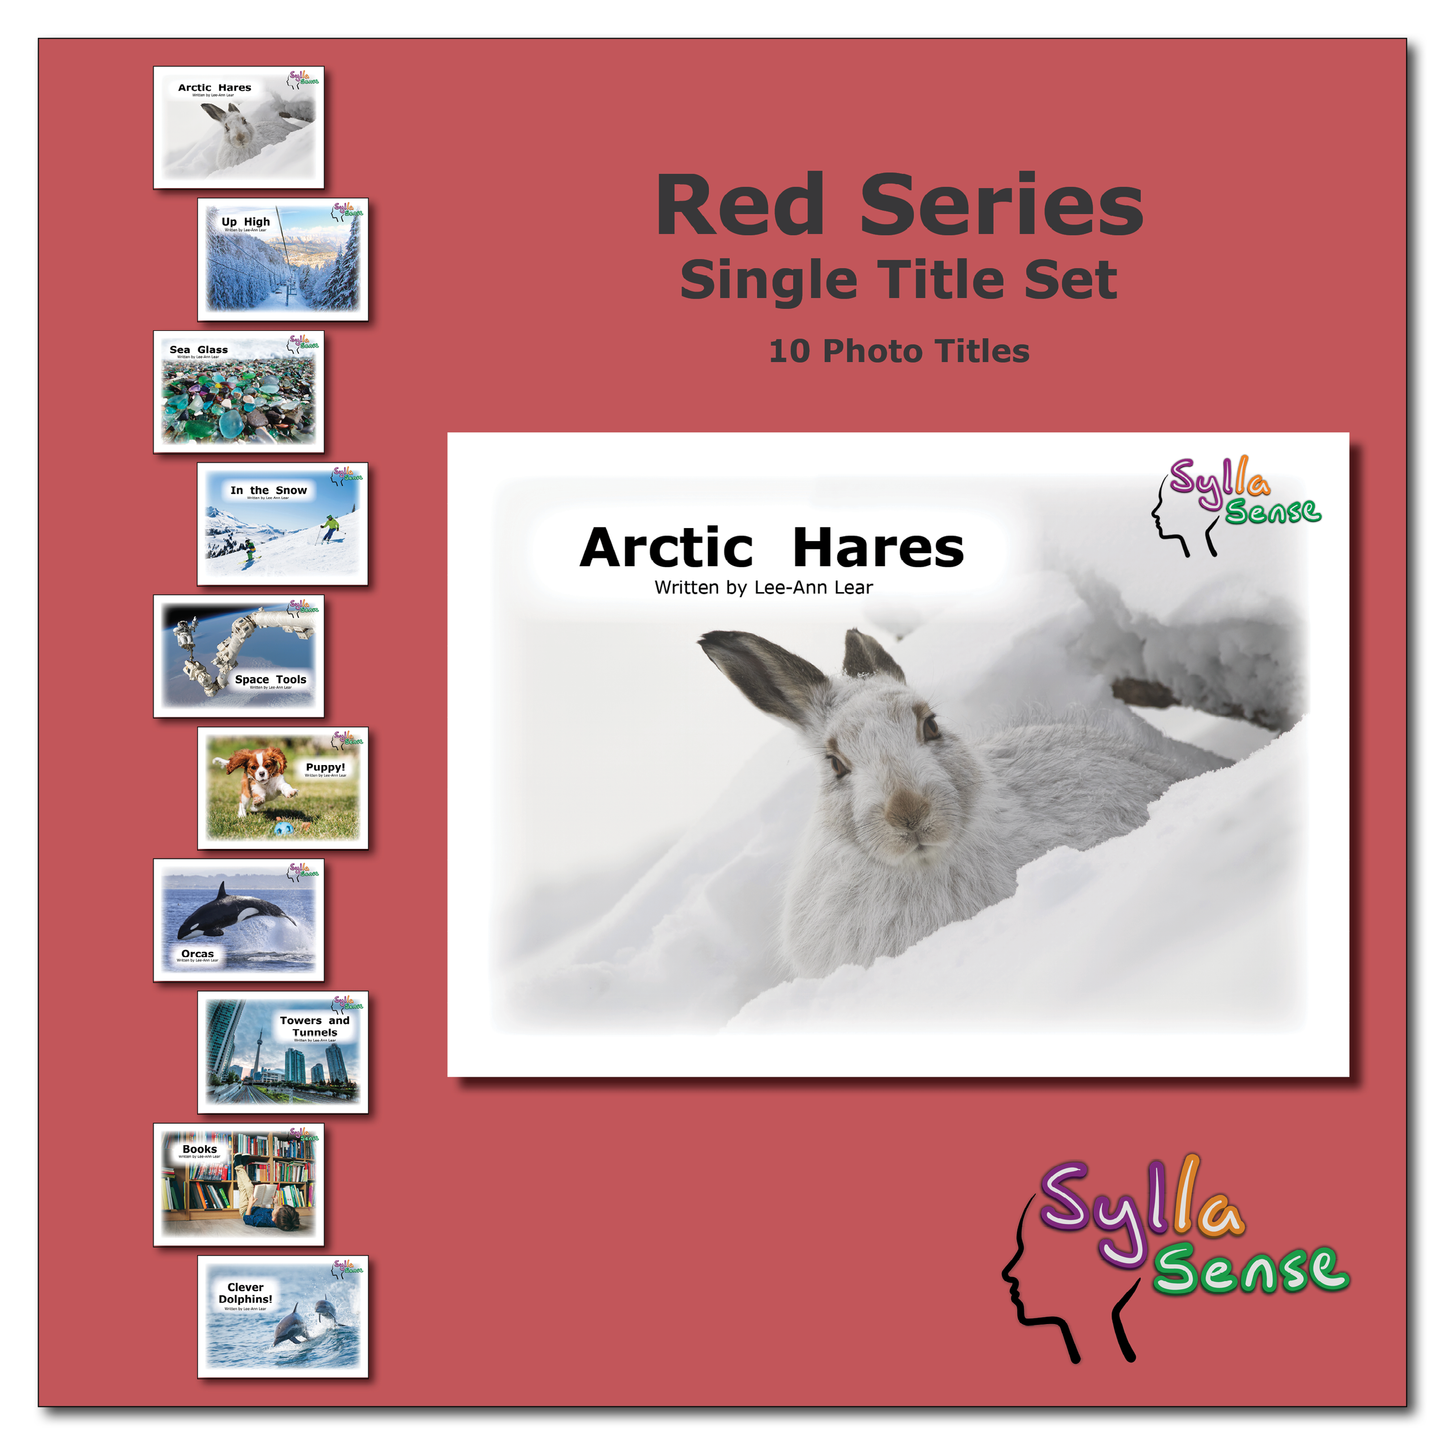 Red Series - Single Title Set